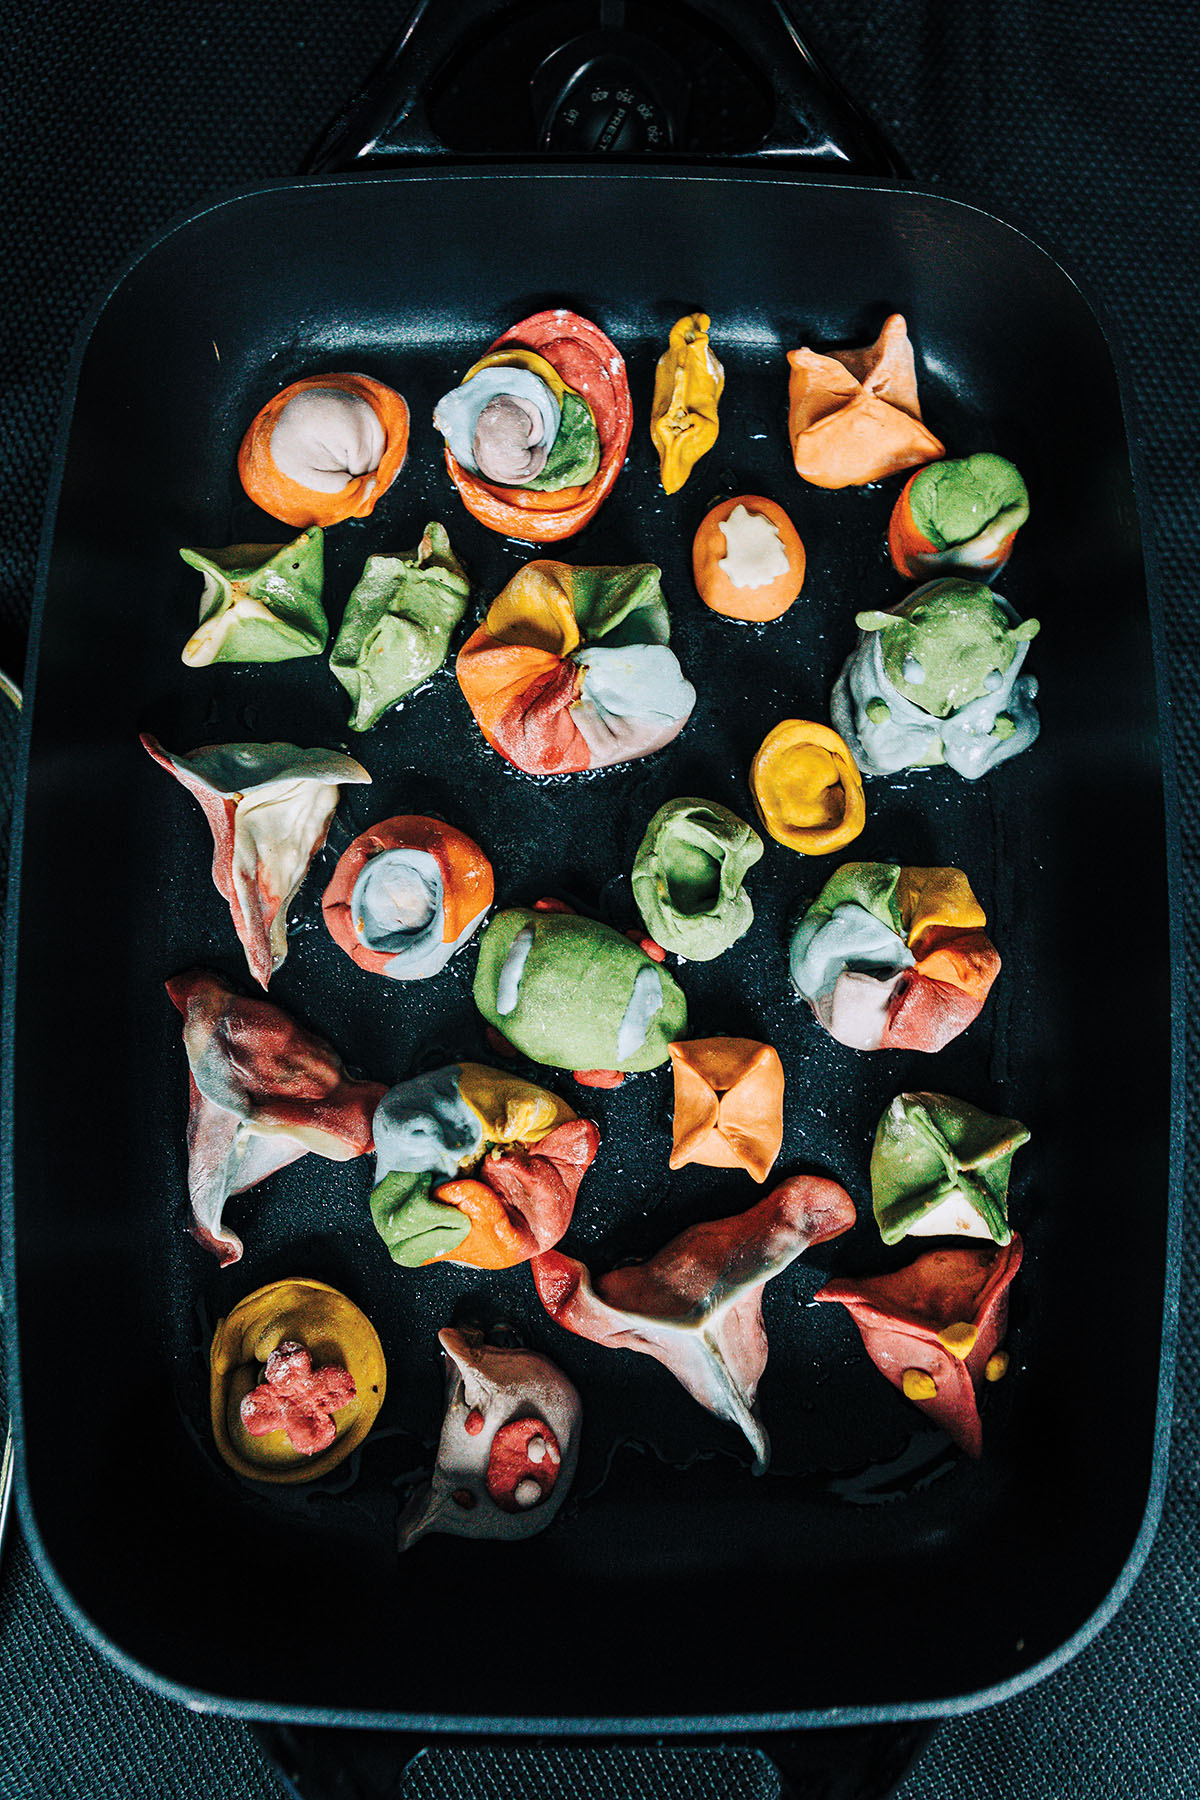 An overhead view of a group of colorful dumplings on a dark background